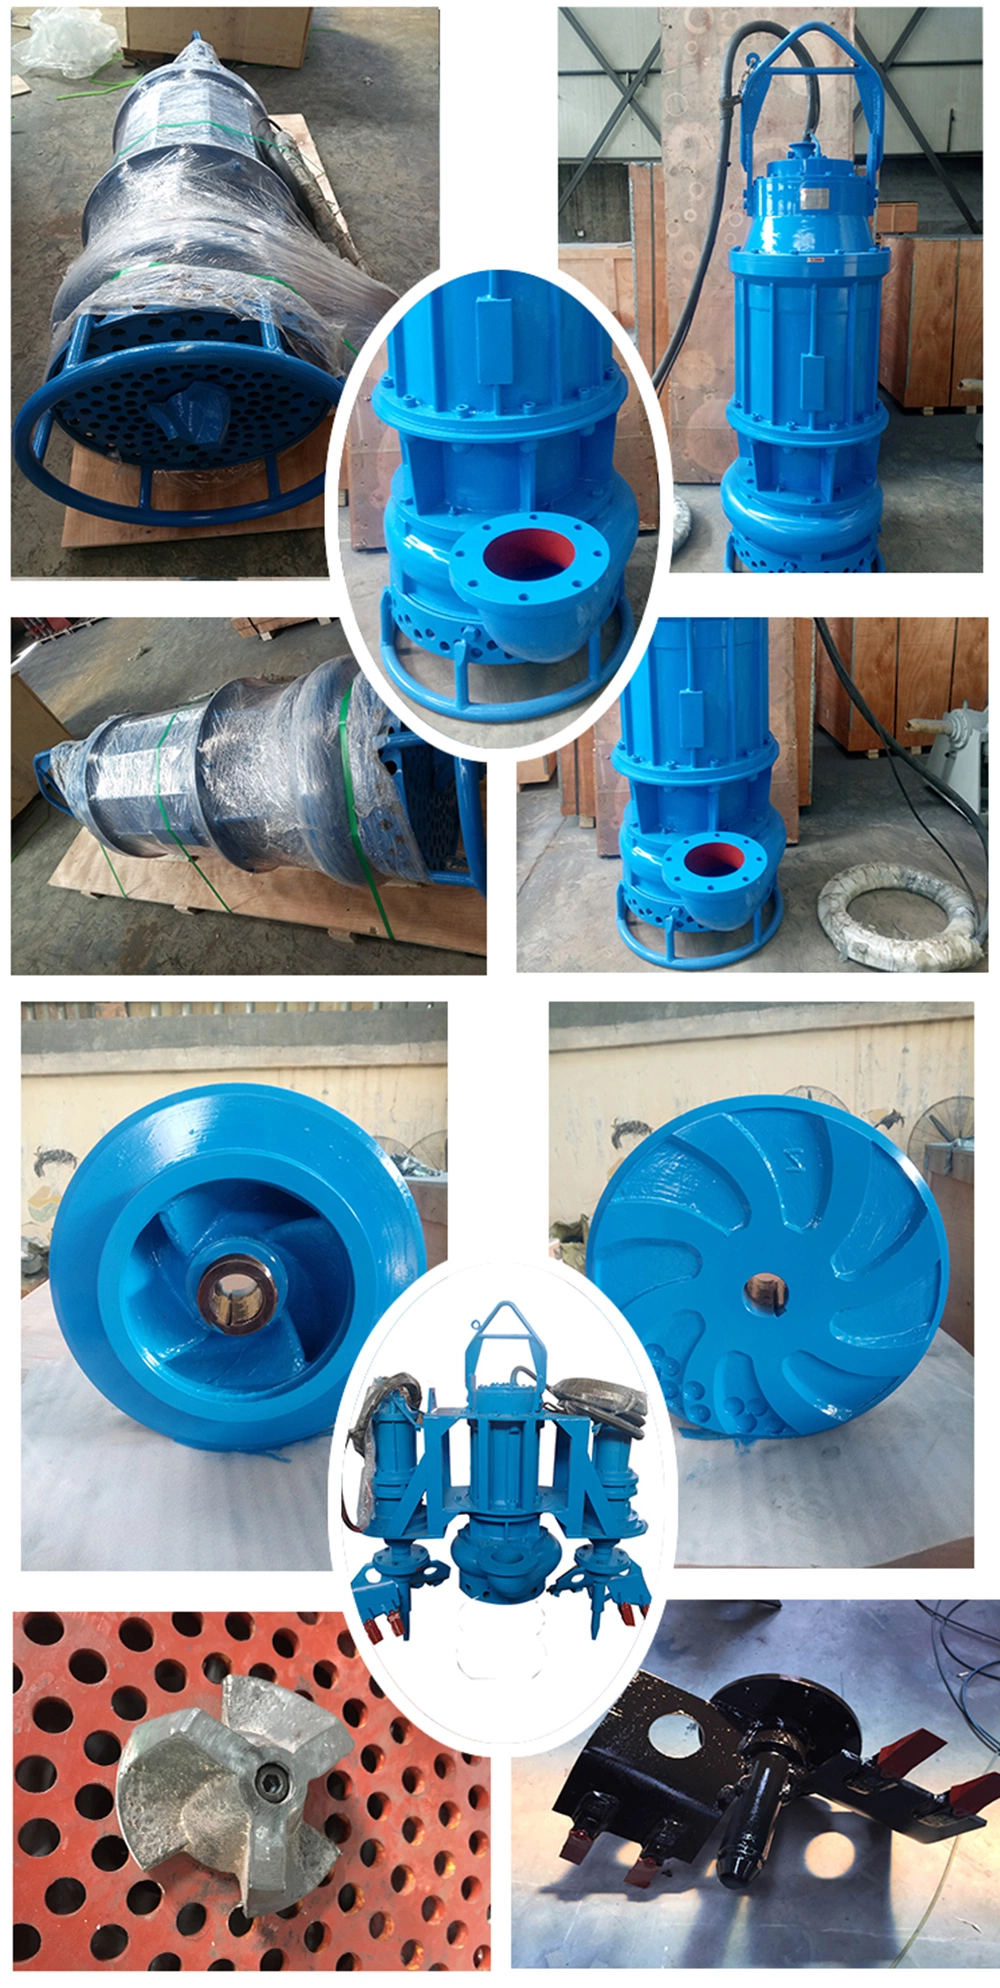 Excavator Industrial Submisable Mining Hydraulic Sand New Slurry Pumps